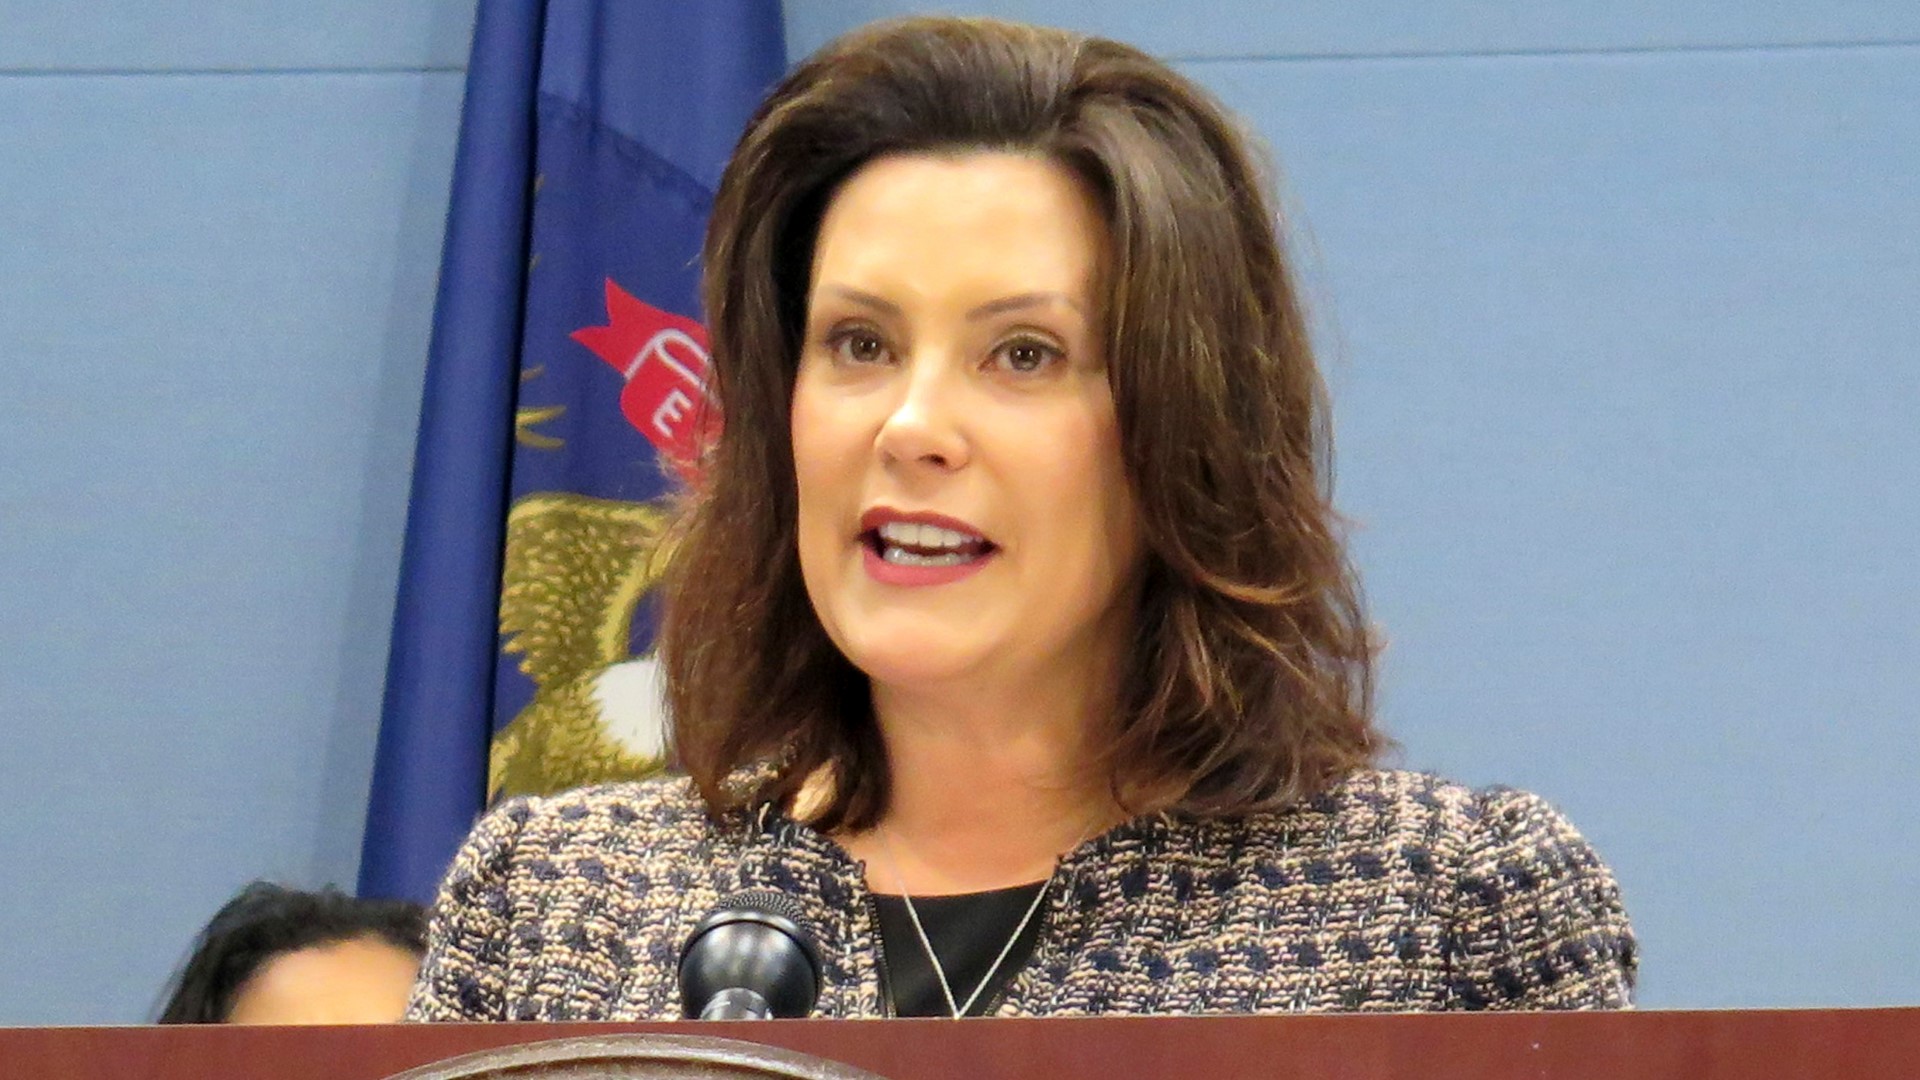 Gov. Gretchen Whitmer is heading to Israel this week for her first international trip as governor.